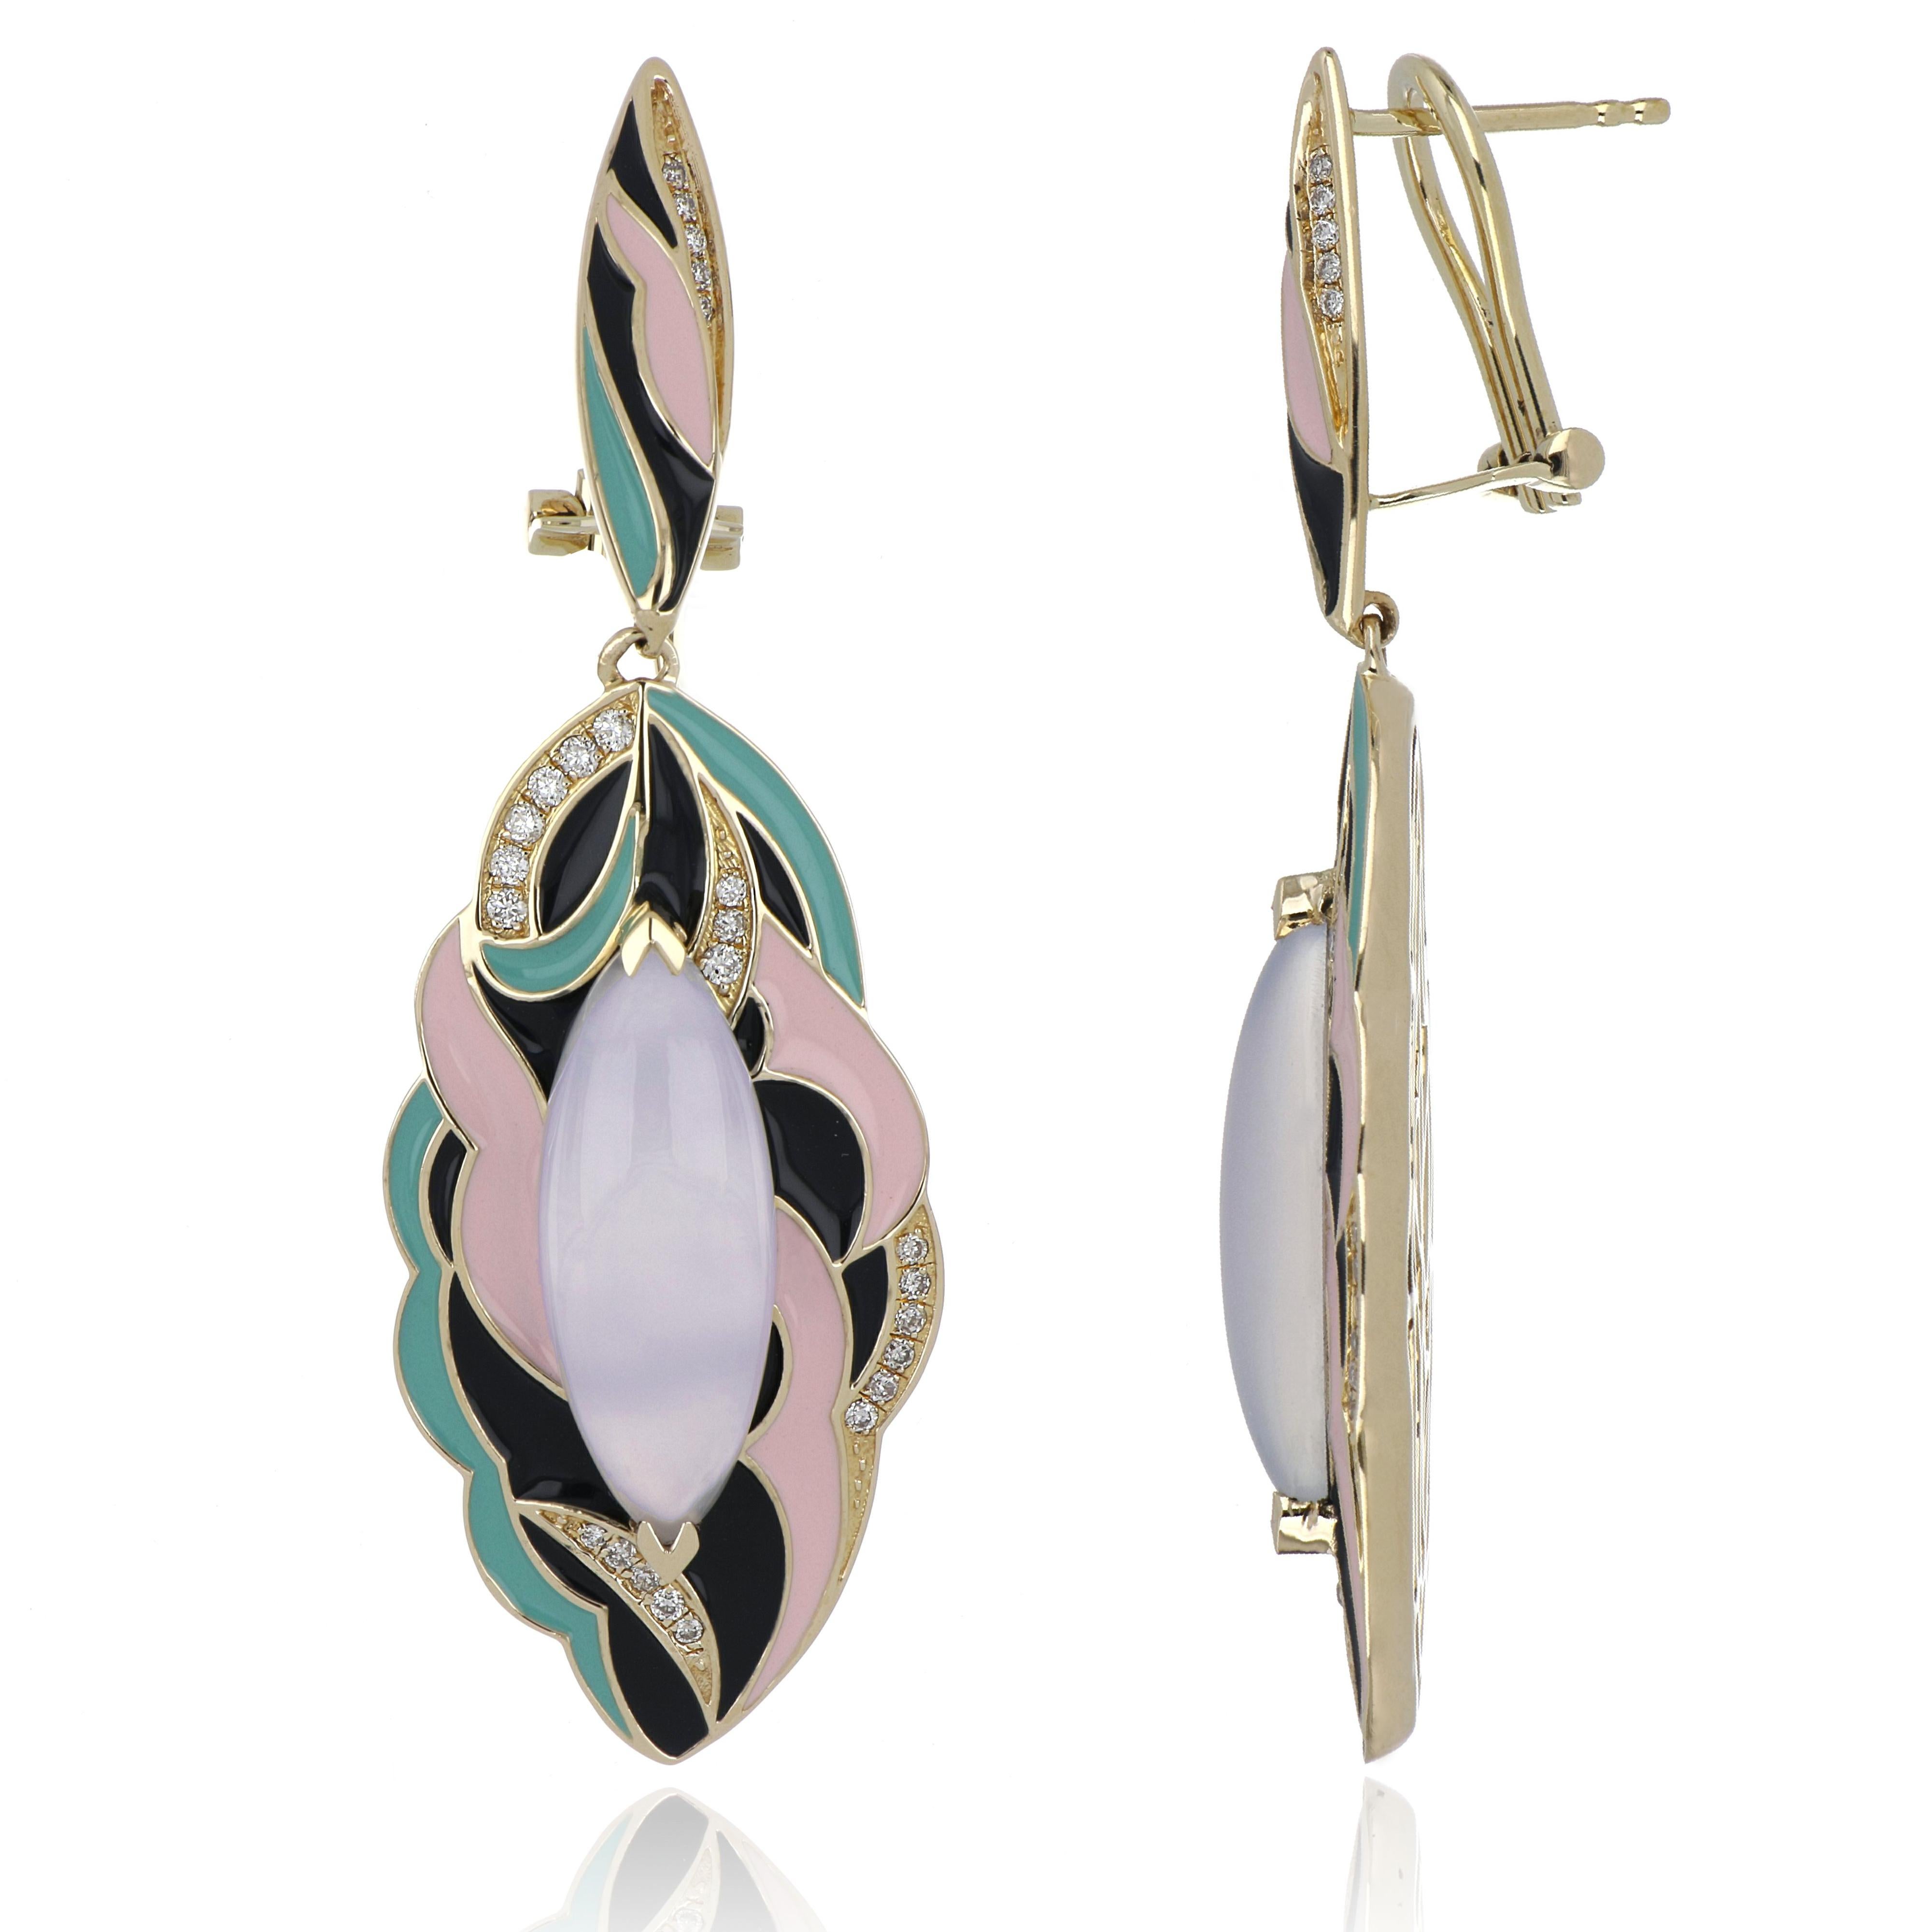 Elegant and exquisite Enamel Cocktail 14 KYG Earrings center set with 7.10 Cts. (total) Cabochon Cut Blue Chalcedony Marquise. Surrounded with Diamonds, weighing approx. 0.30 Cts. enhanced with detailed Multi Color Enamel  Beautifully Hand crafted